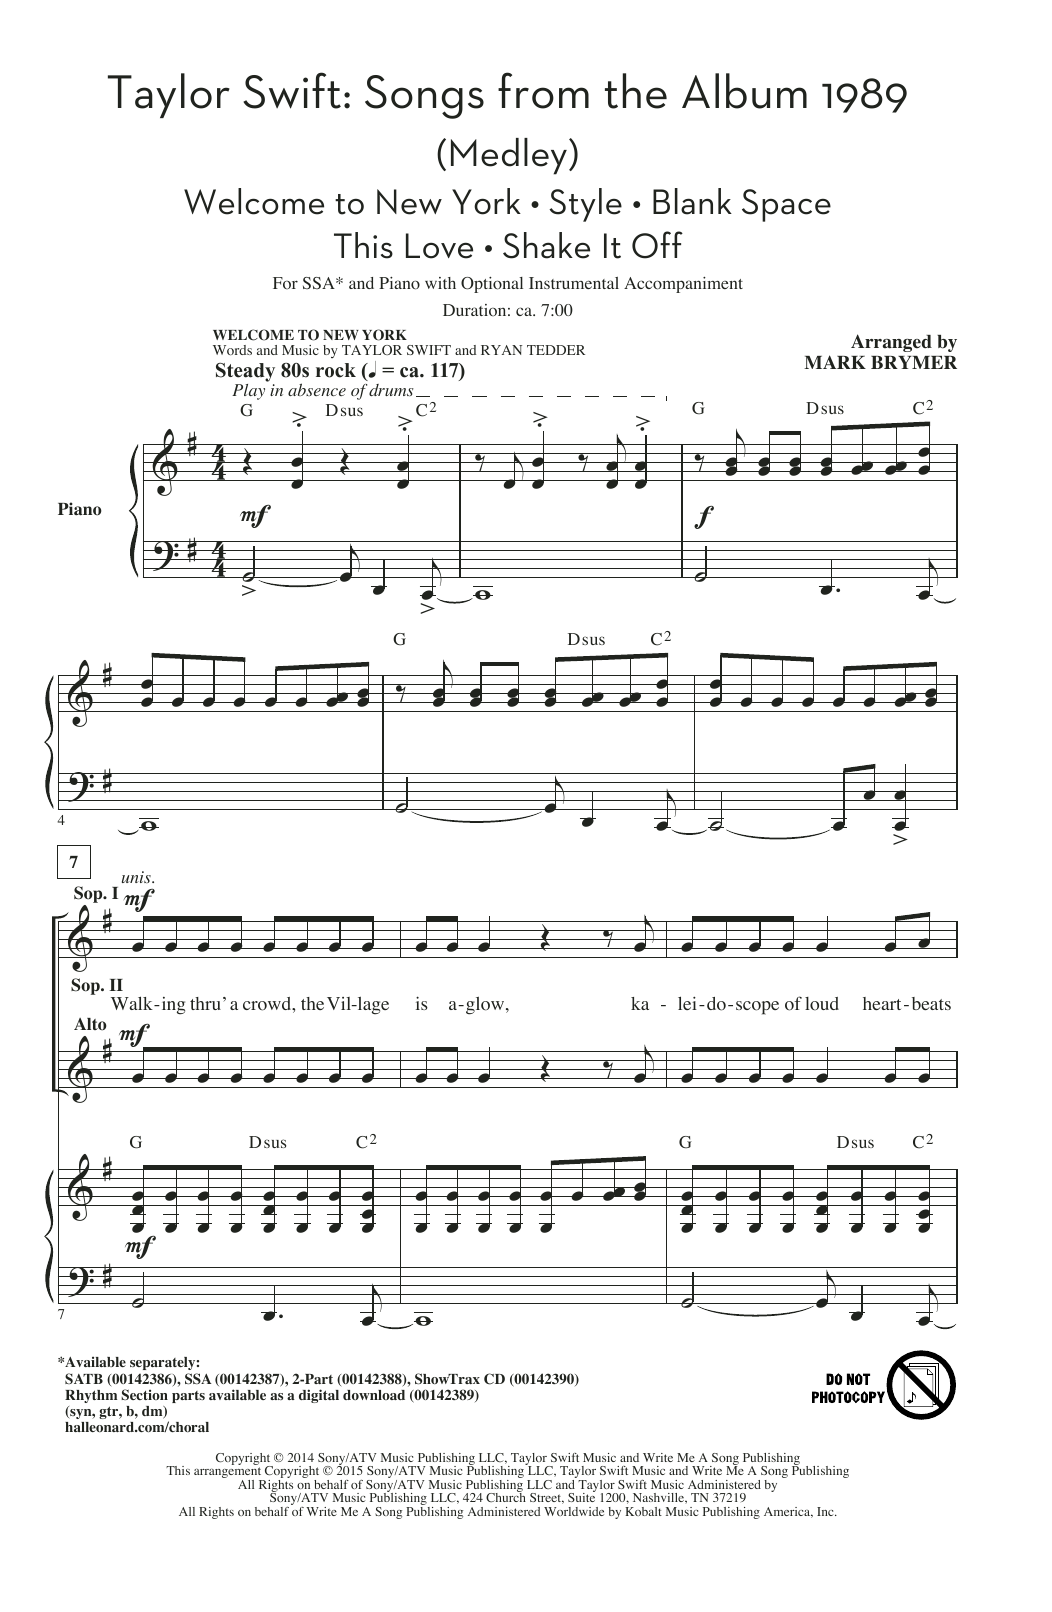 Download Taylor Swift Taylor Swift: Songs from the Album 1989 Sheet Music